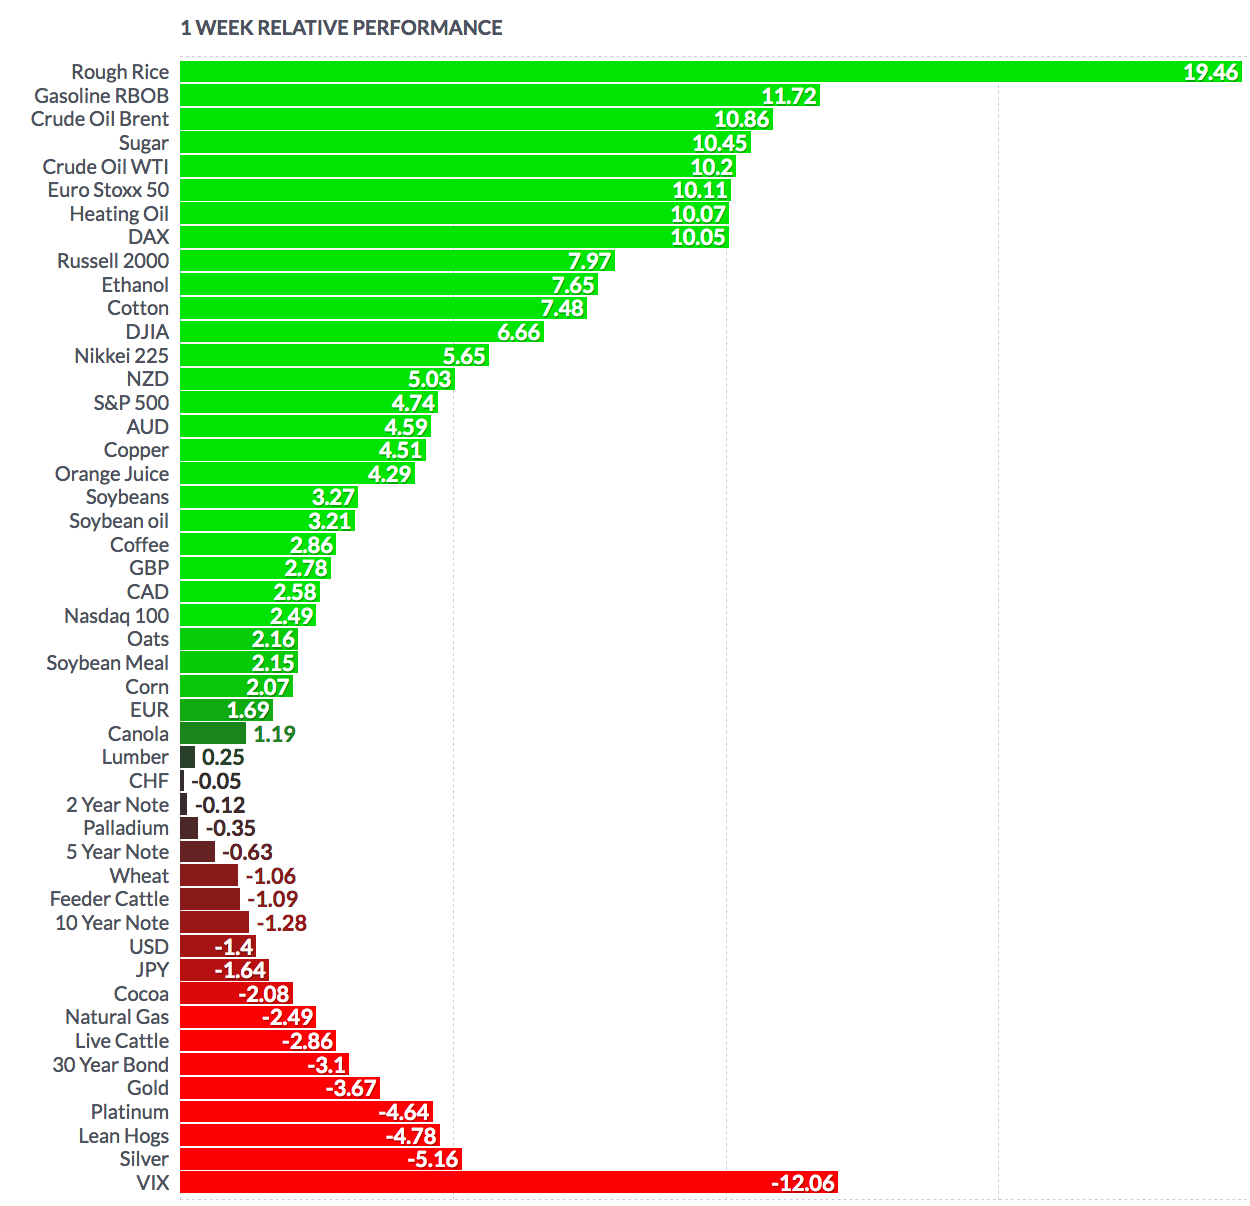 Futures Weekly Performance